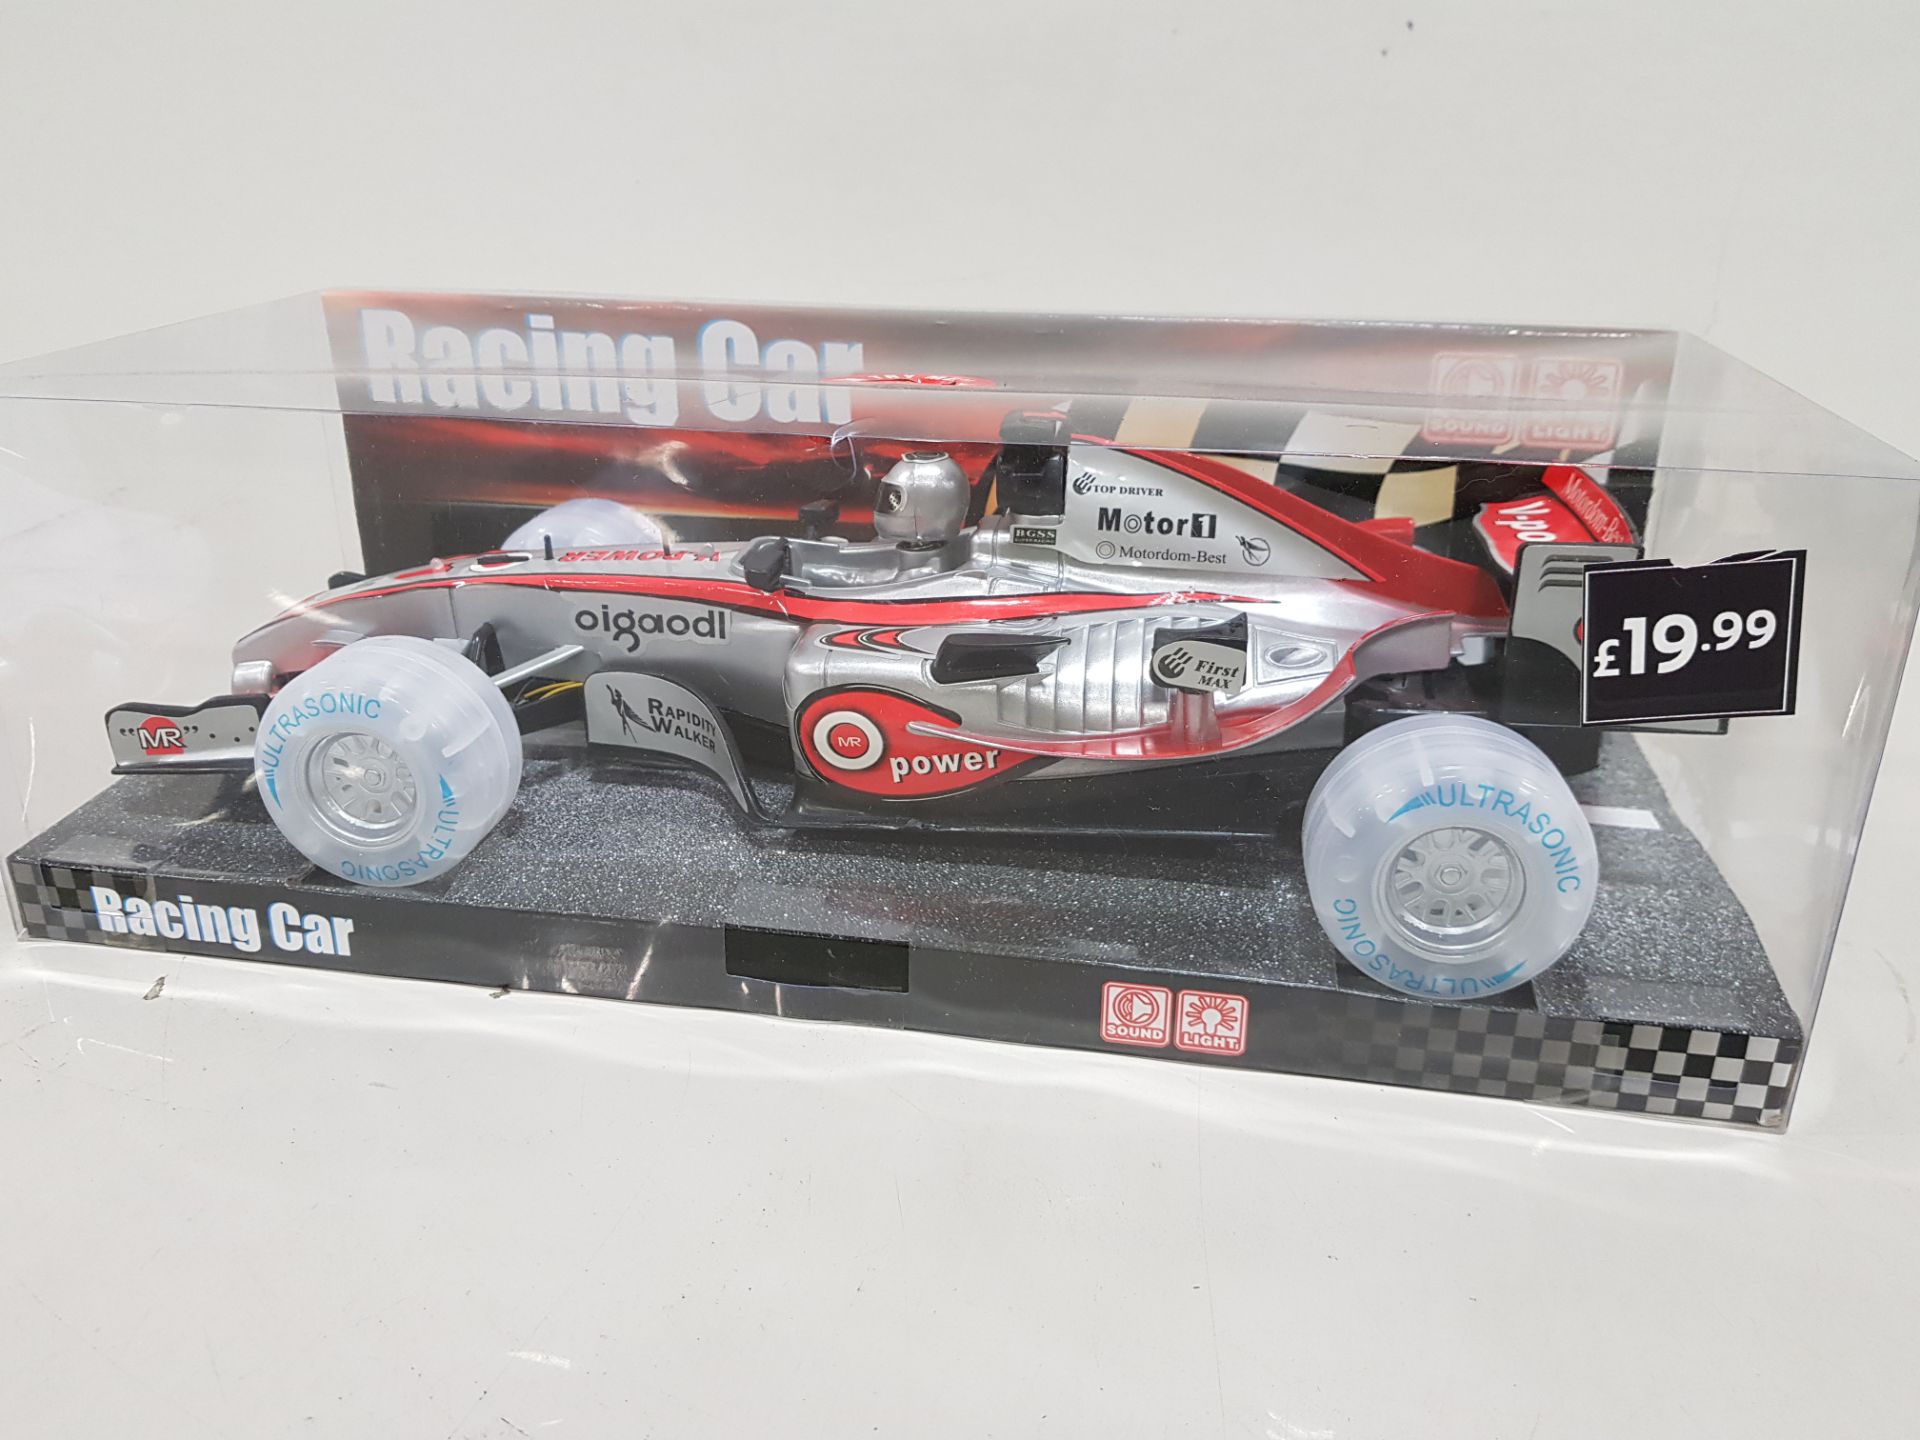 36 X BRAND NEW TRY ME RACING CARS WITH WORKING SOUND AND LIGHT IN RETAIL PACKAGING WITH RRP £19.99